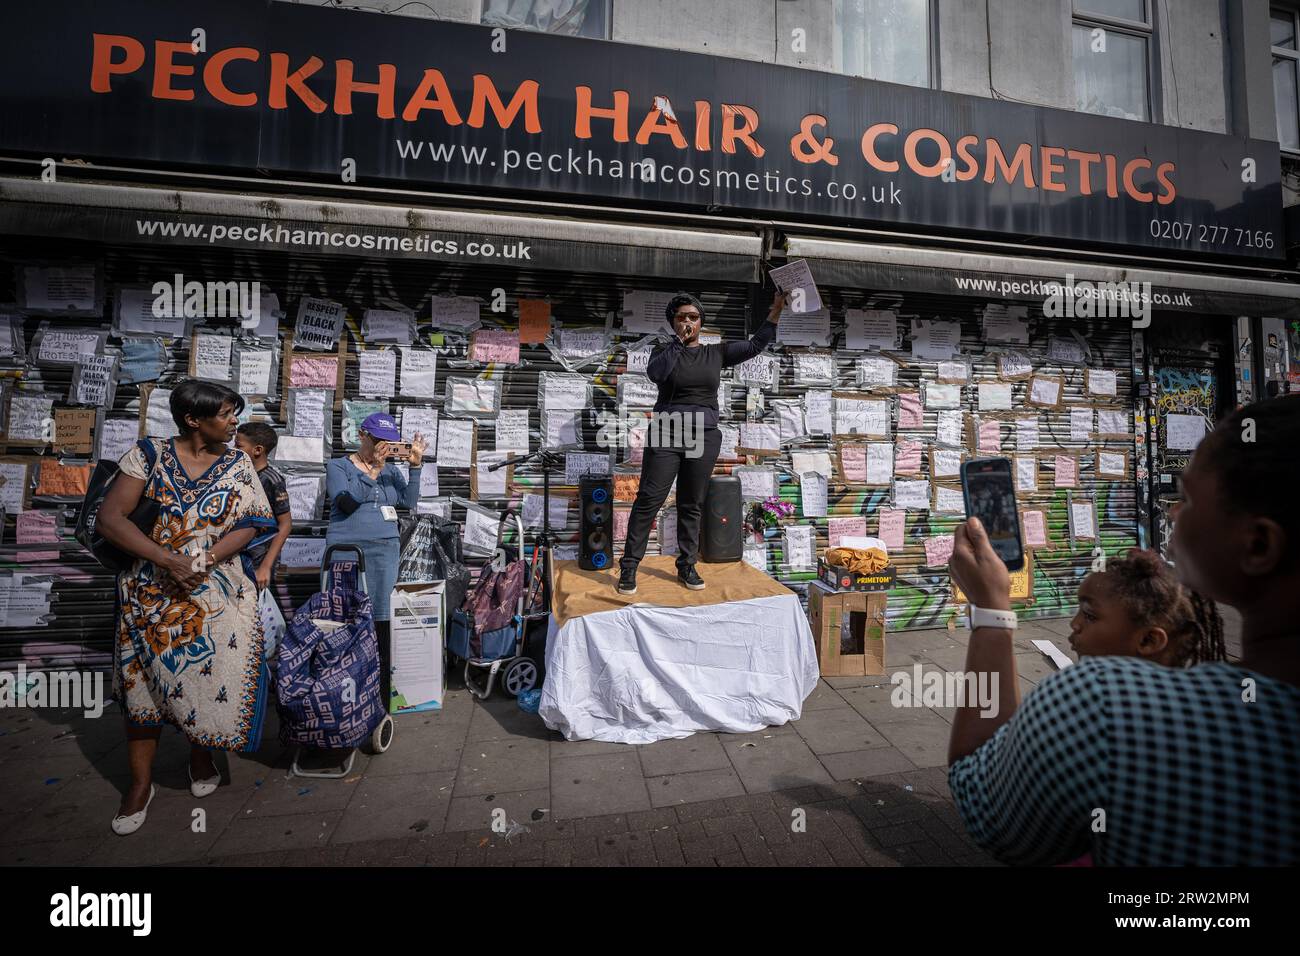 London, UK. 16th September 2023. Protests and speeches continue outside Peckham Hair and Cosmetics shop on Rye Lane in east London. The south east London hair and beauty shop has remained closed since Tuesday 12th after a video circulated on social media appears to show a scuffle between a 31-year old black woman and the male owner of Peckham Hair and Cosmetics, Sohail Sindho, 45, who appears to put his hands around her throat during the altercation. Credit: Guy Corbishley/Alamy Live News Stock Photo